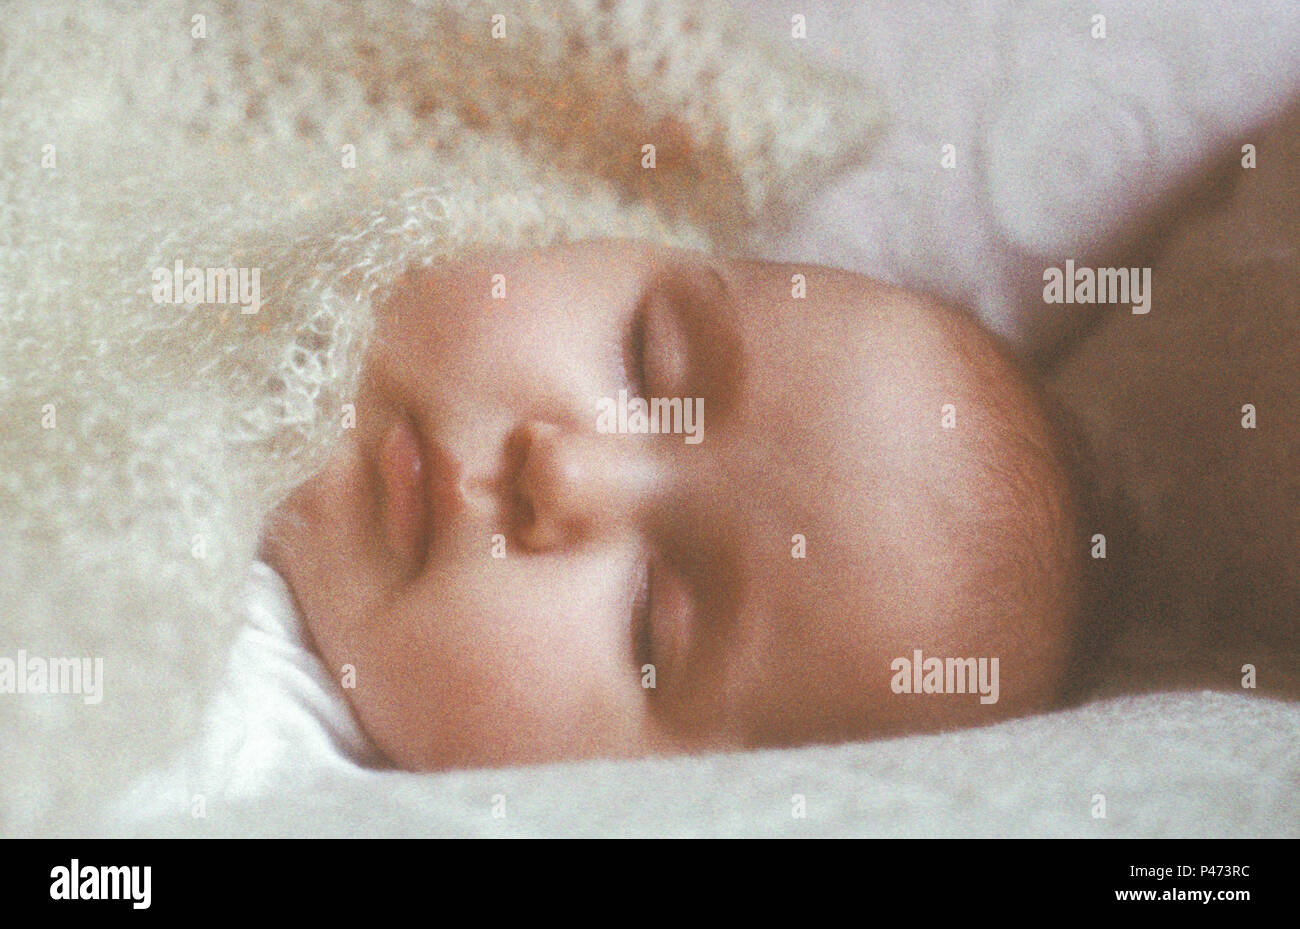 Close up of sleeping baby, 2 mois Banque D'Images